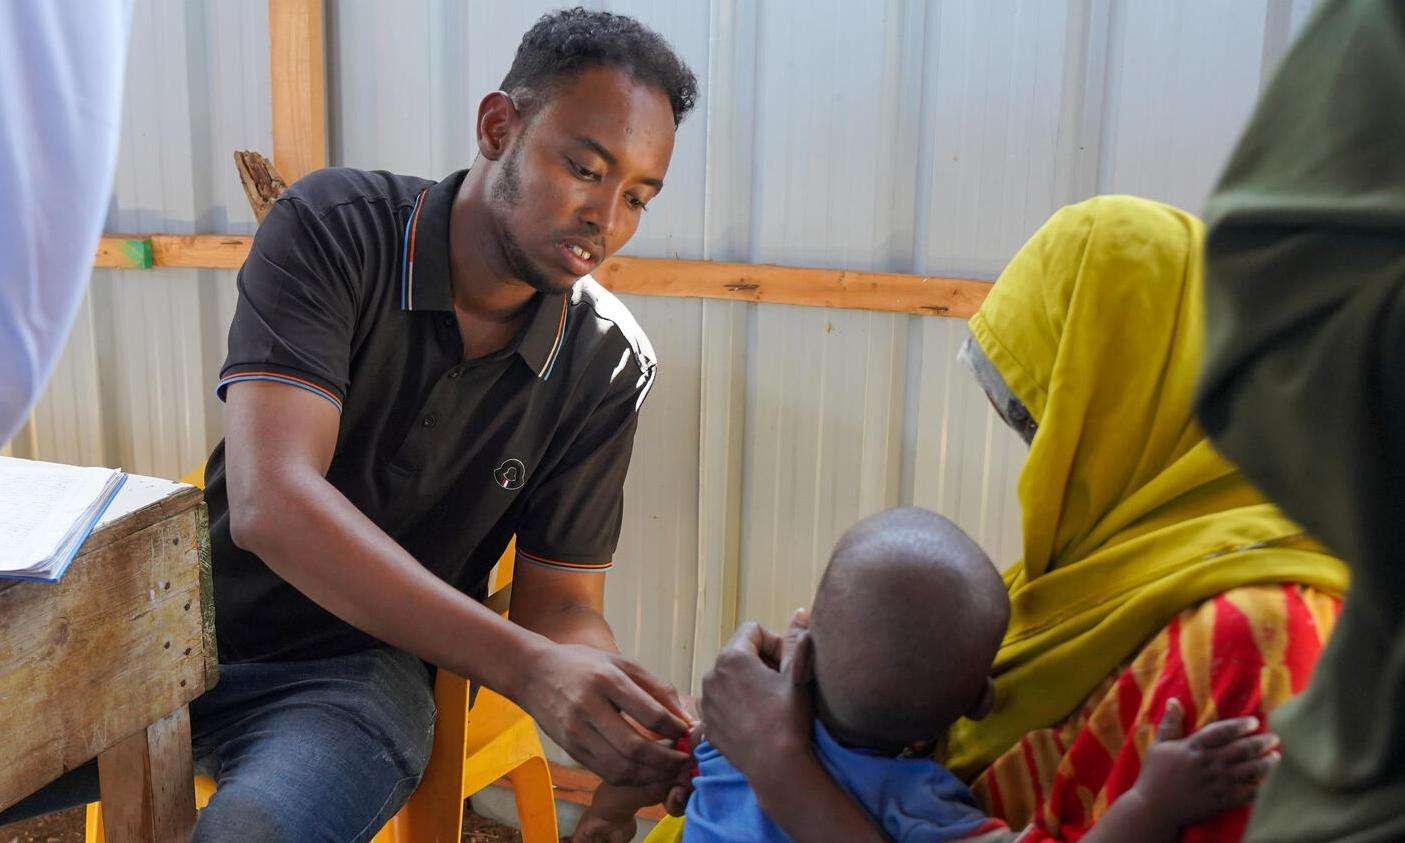 Health care worker measuring arm circumference of a child in Baidoa, Somalia